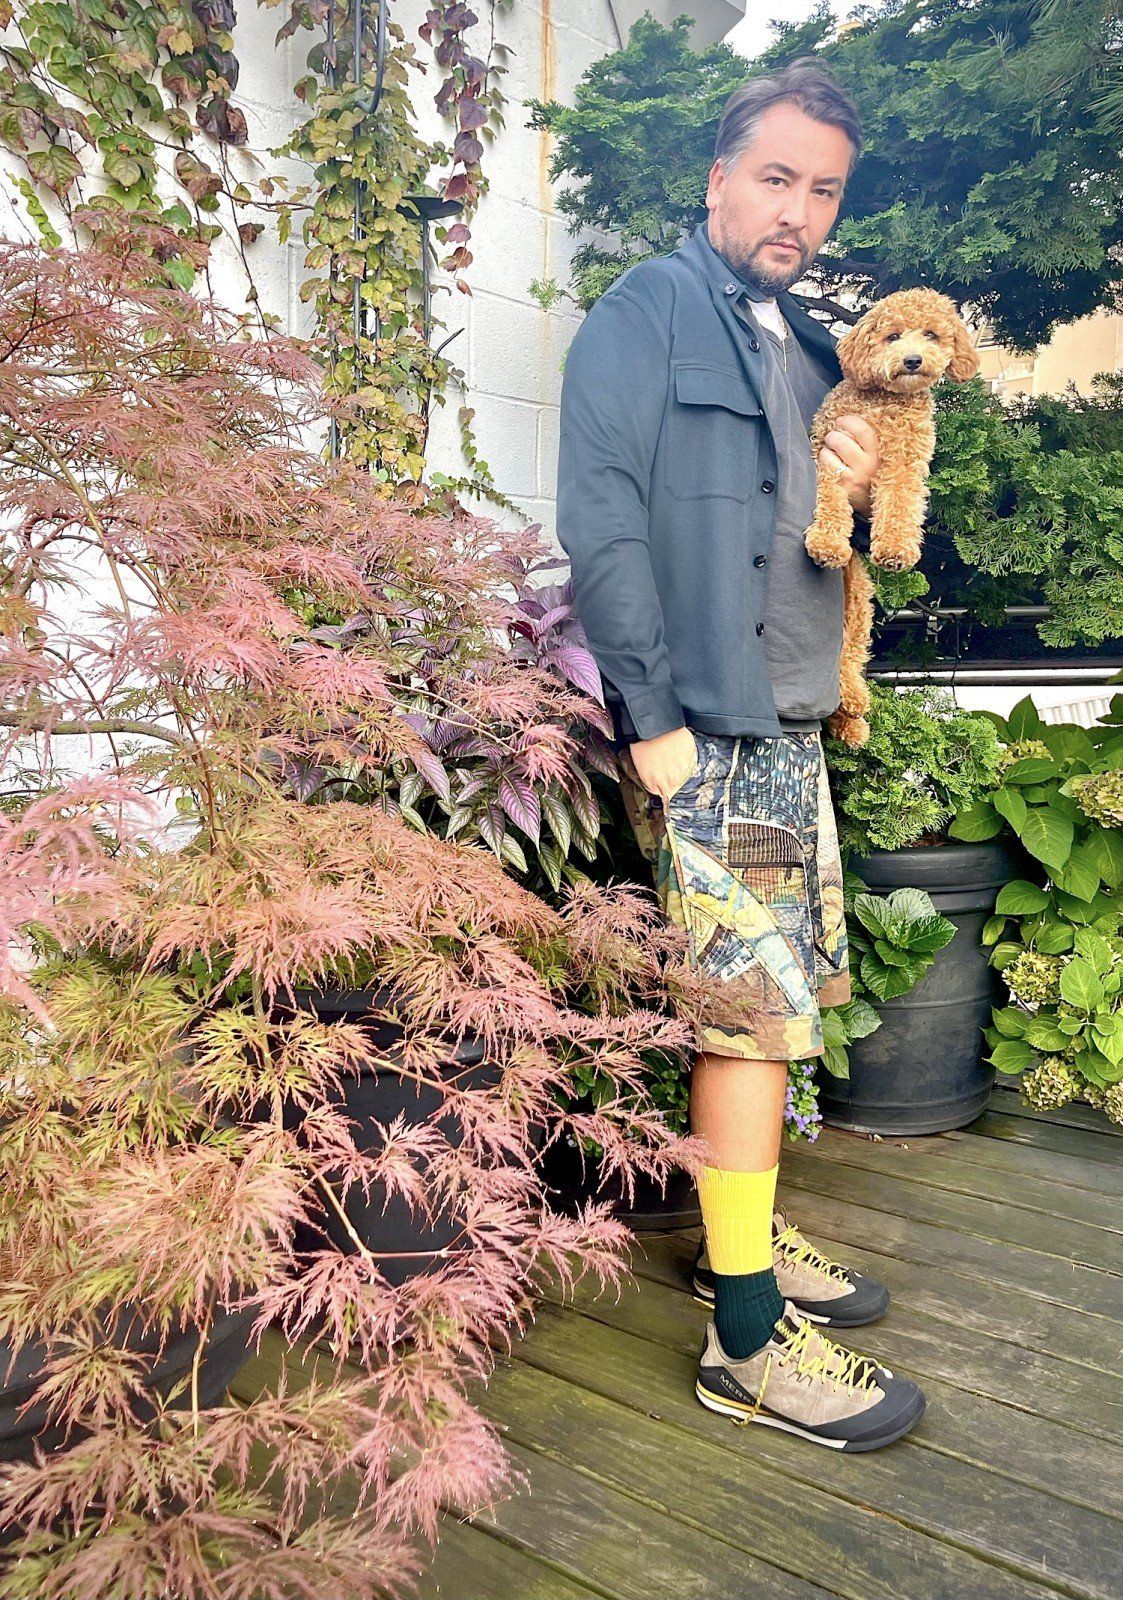 Michael Fisher in Summer Moss socks holding his dog